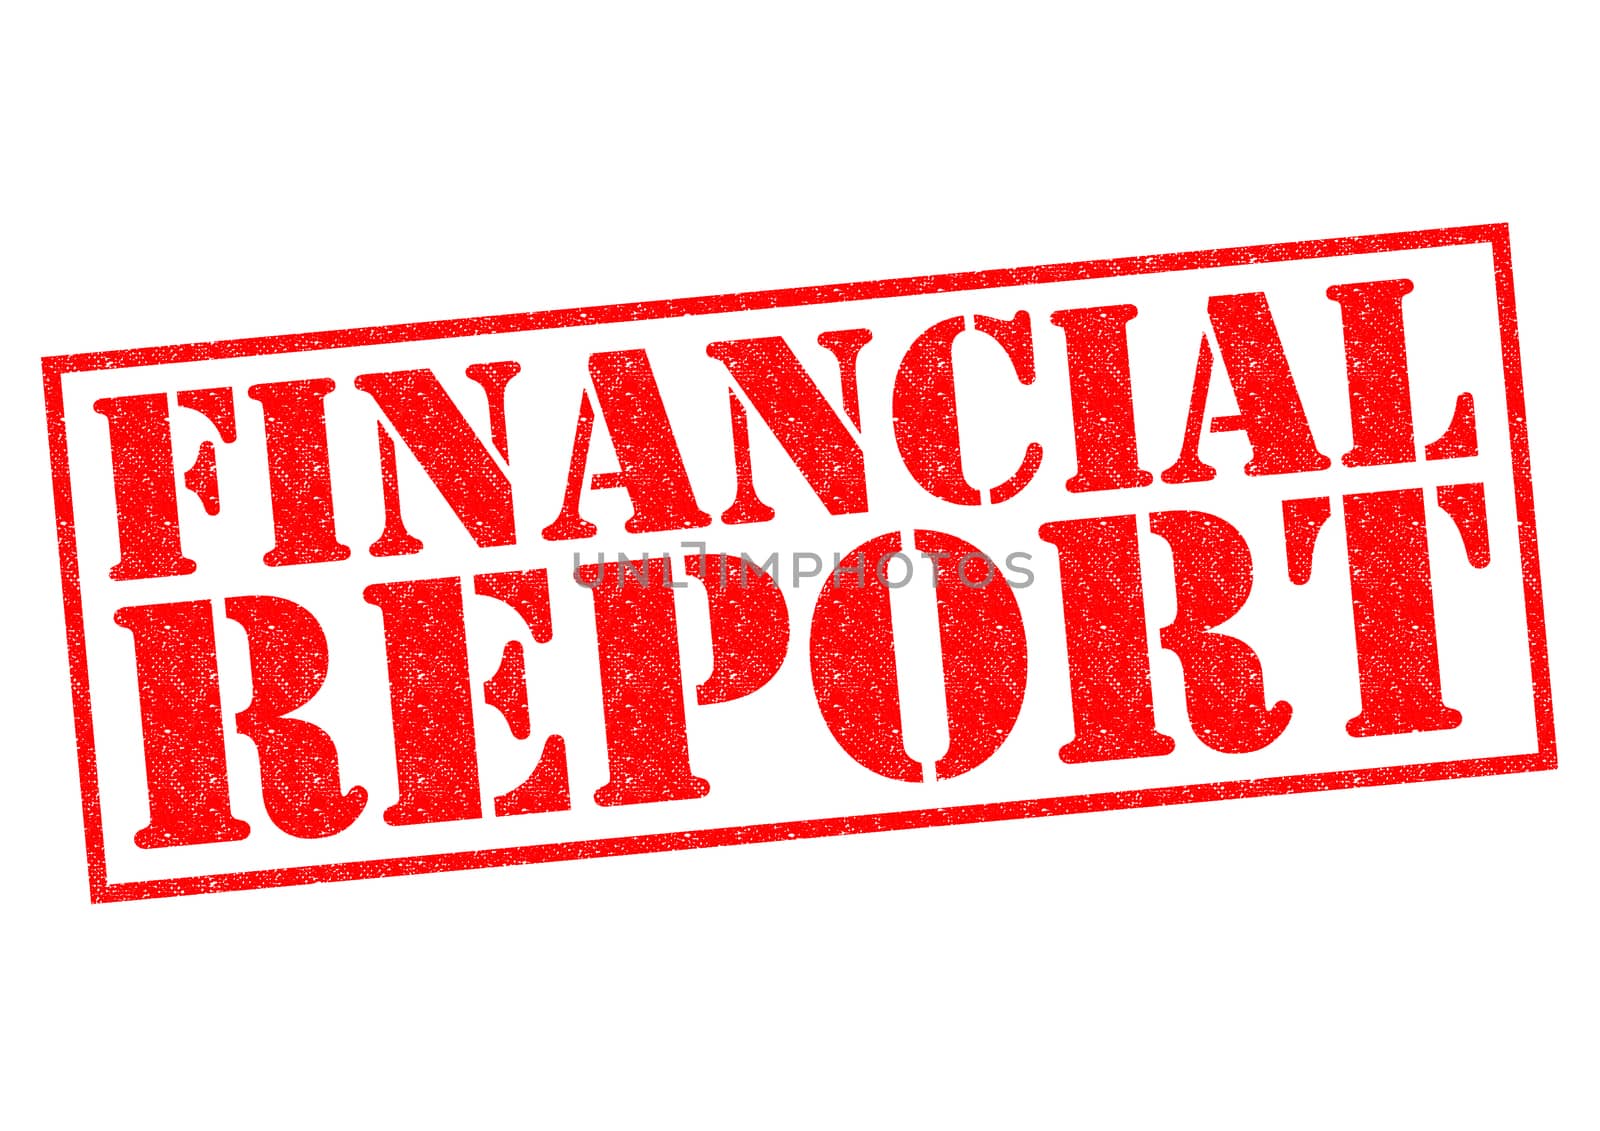 FINANCIAL REPORT red Rubber Stamp over a white background.